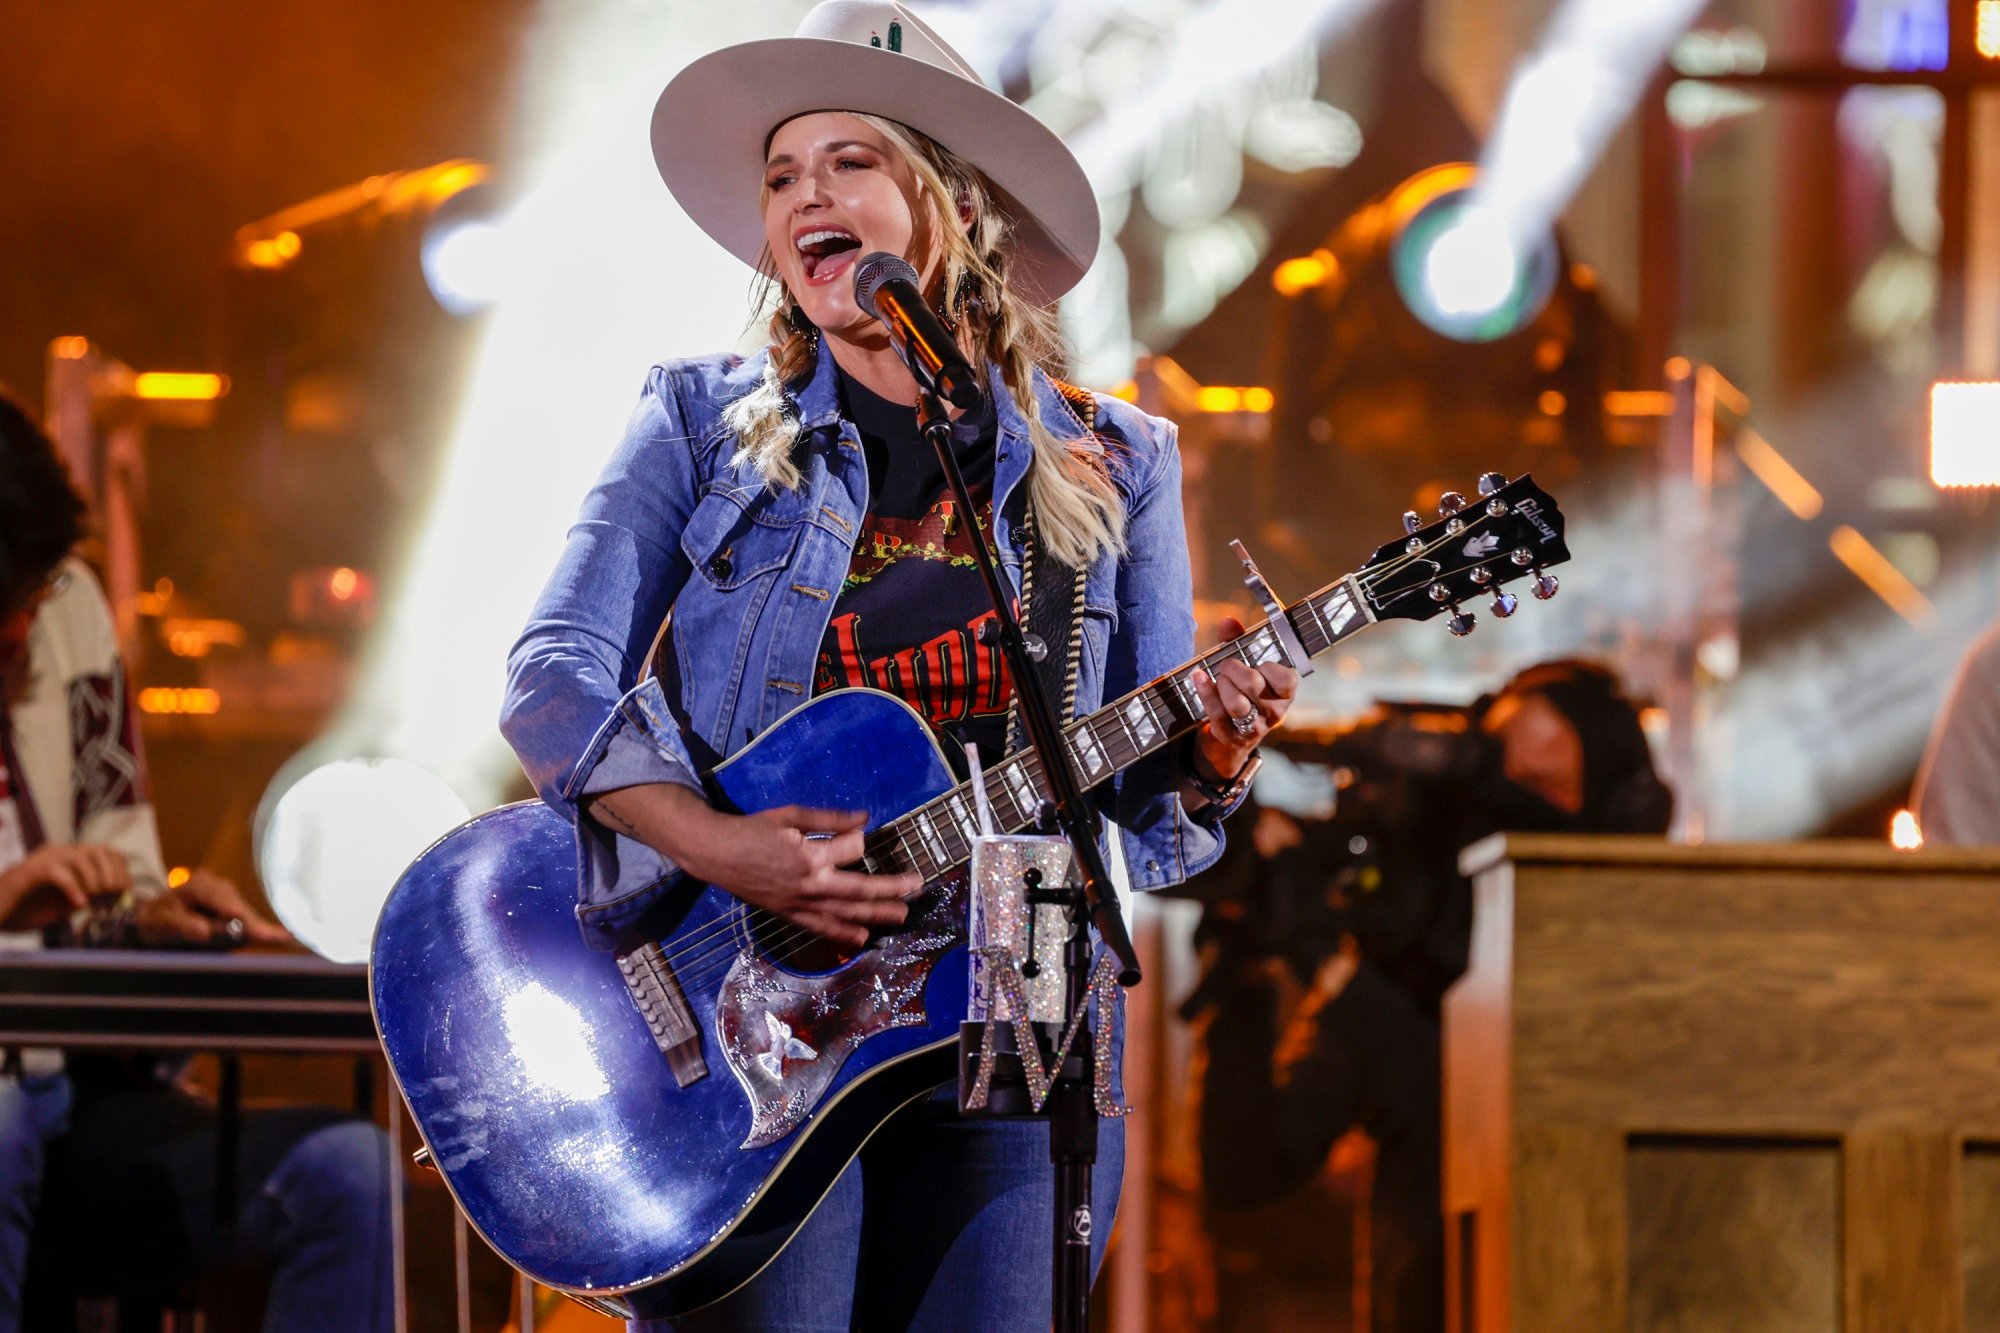 Miranda Lambert performs onstage with a blue guitar